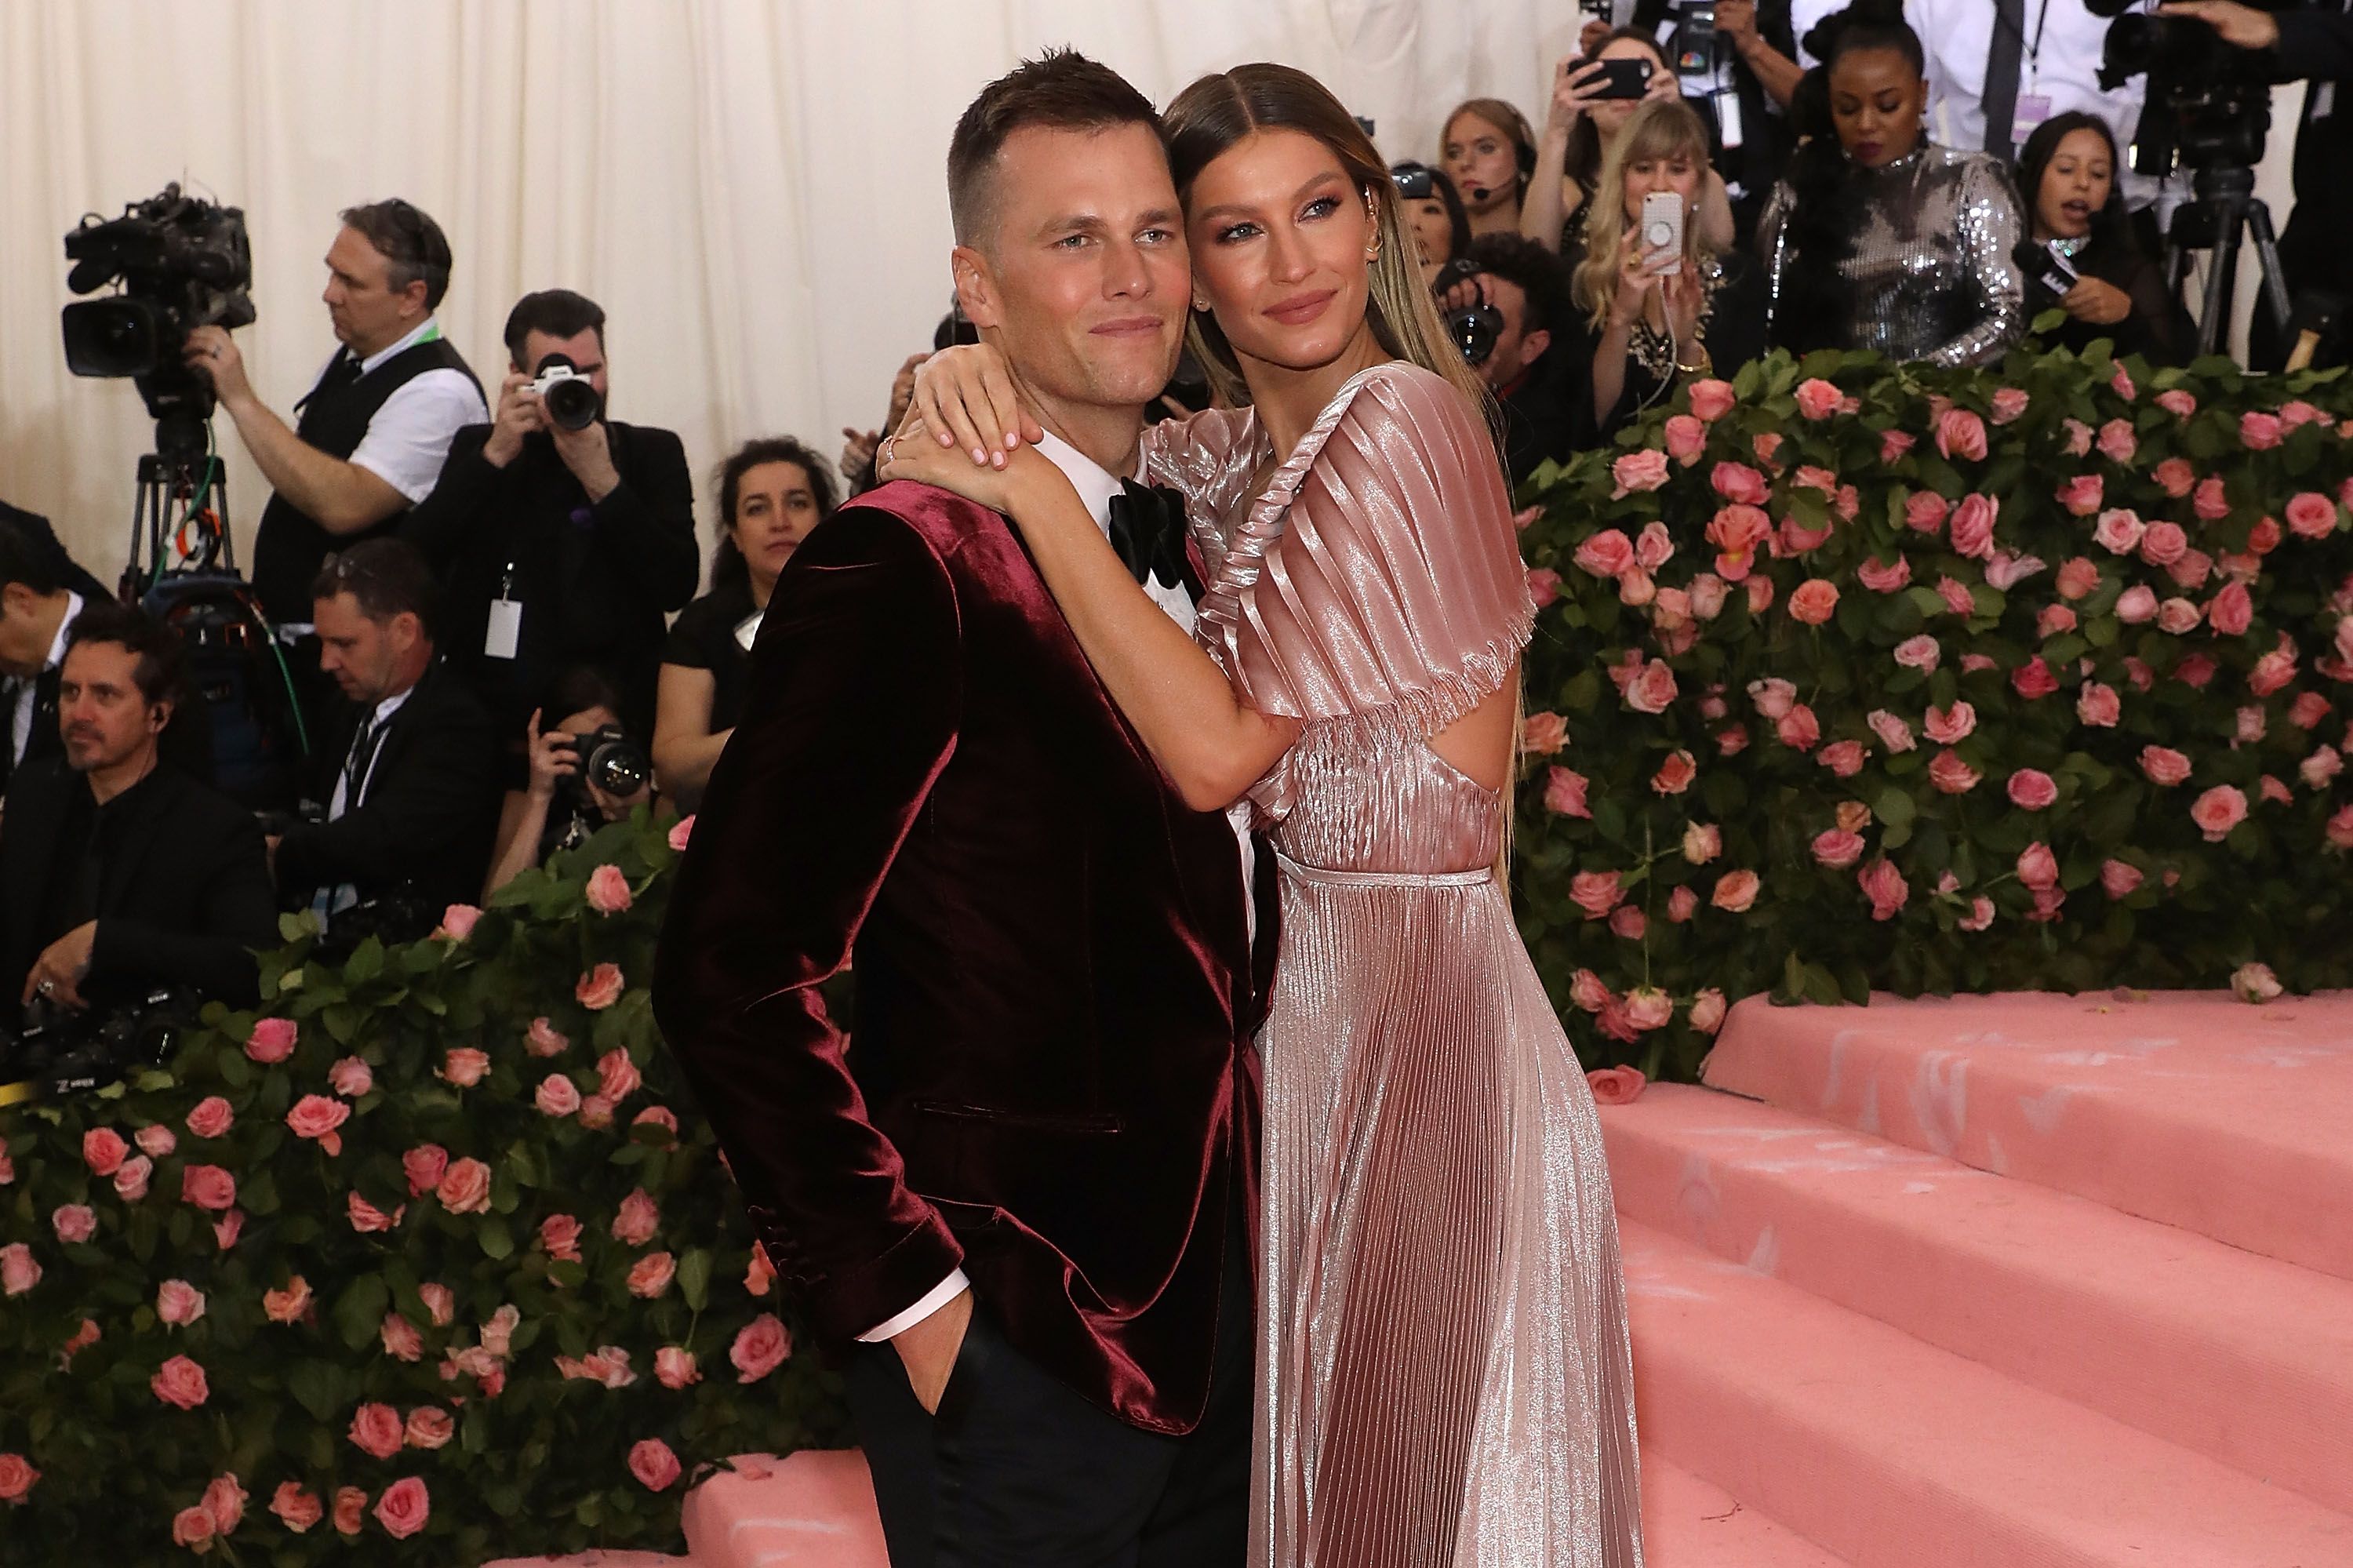 Gisele Bundchen and Tom Brady at the Met Gala celebrating "Camp: Notes on Fashion" at The Metropolitan Museum of Art on May 6, 2019 | Photo: Getty Images